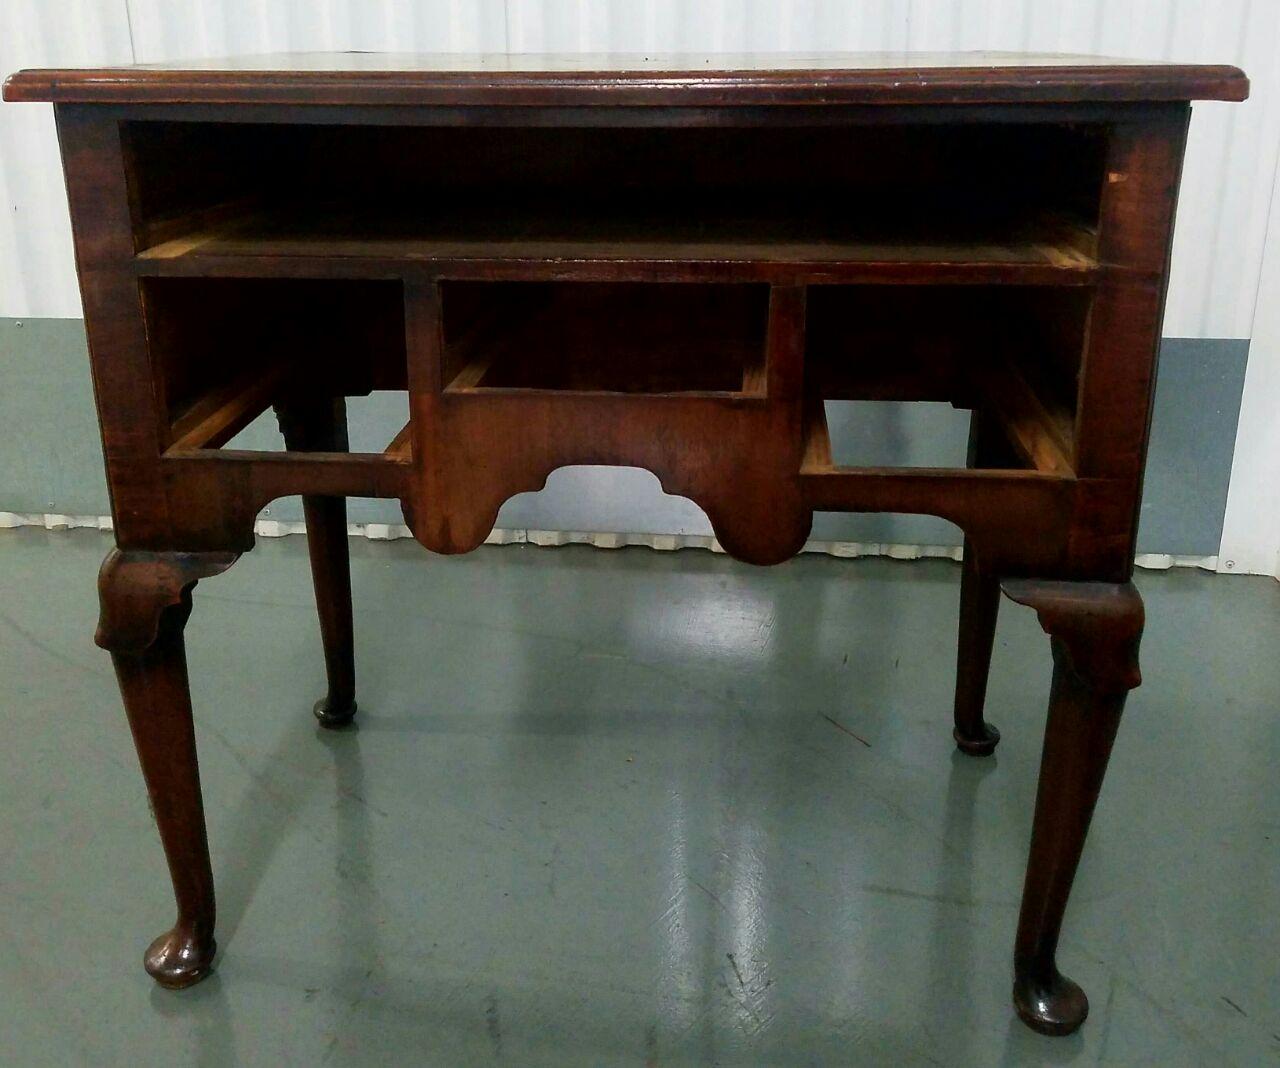 19th century mahogany Queen Anne lowboy

Beautiful antique lowboy with a rich patina. Hand carved and custom made.

This lowboy has a small footprint and will fit into most spaces. This would be a great laptop desk, console table, or vanity